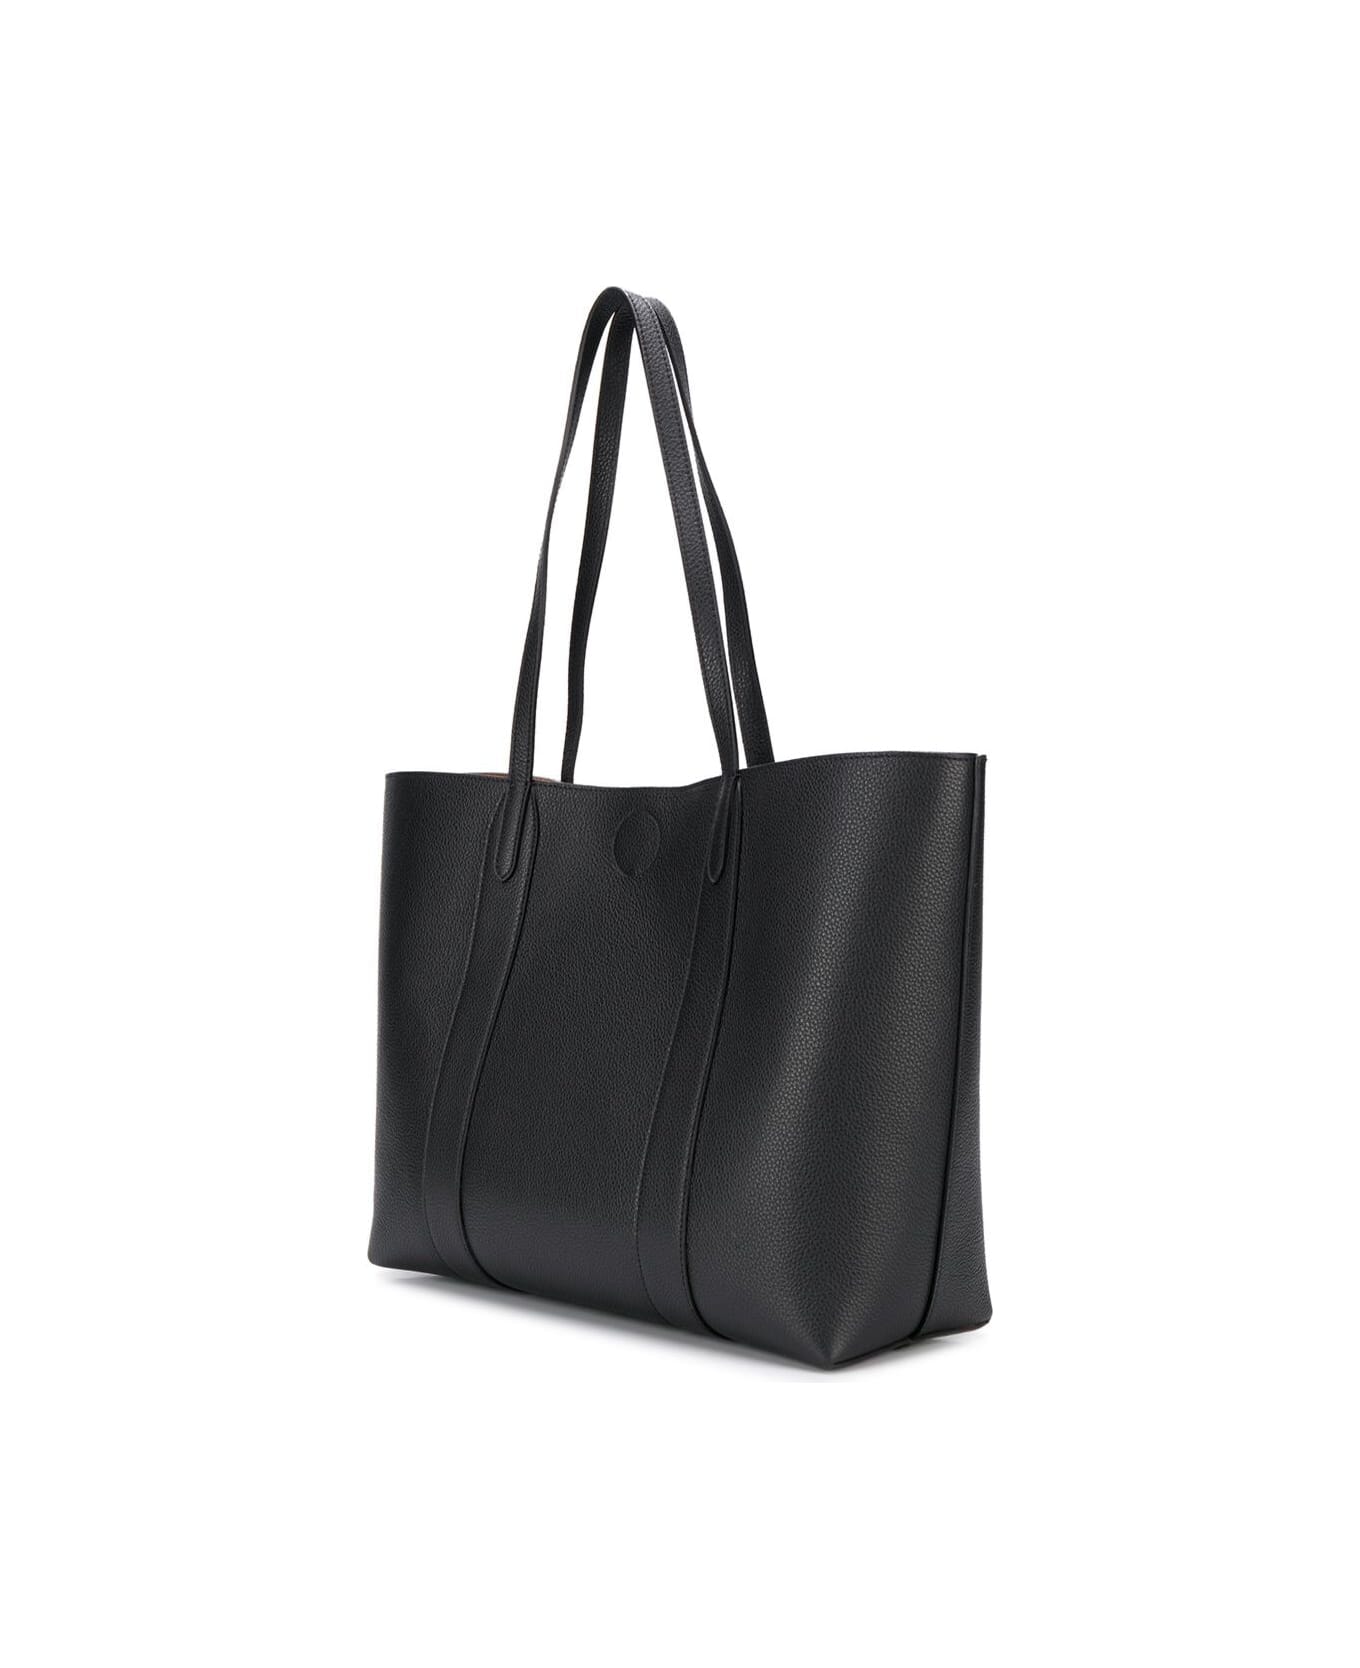 Mulberry Small Tote Black Leather Shopper Bag Mulberry Woman - Black トートバッグ